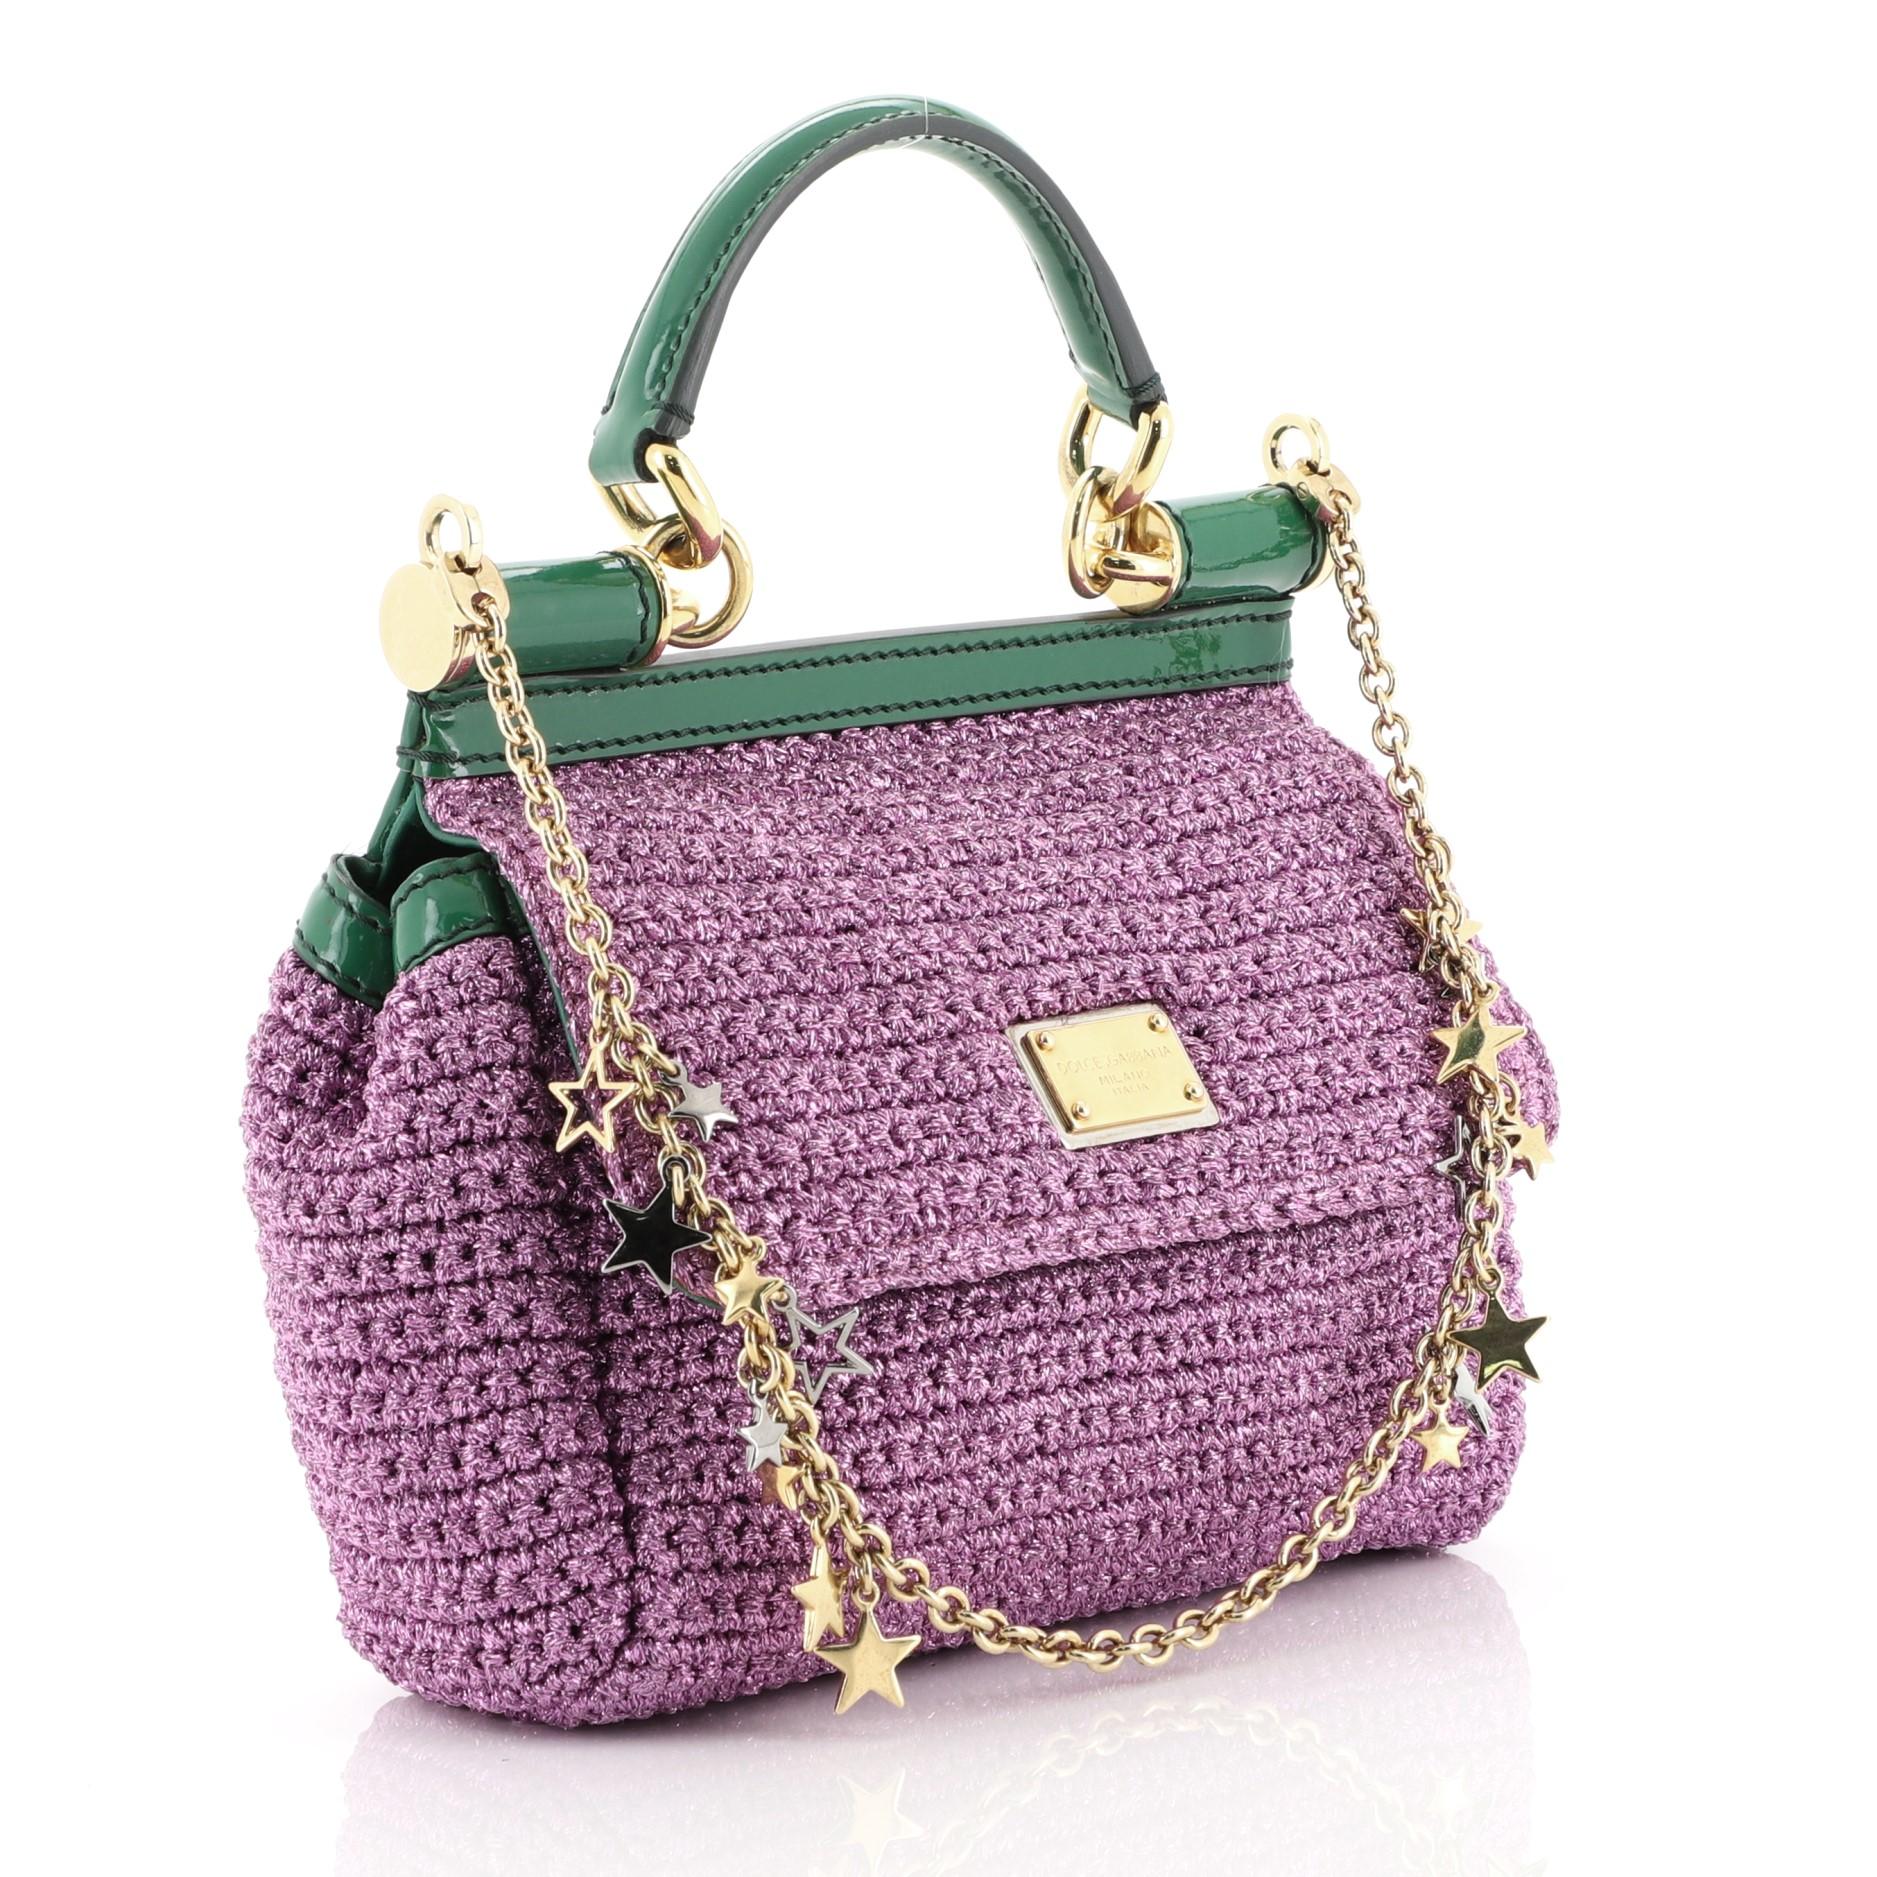 This Dolce & Gabbana Miss Sicily Bag Woven Raffia Small, crafted from purple woven raffia, features a leather top handle, leather trim, and gold-tone hardware. Its framed top flap with magnetic snap closure opens to a brown printed fabric interior